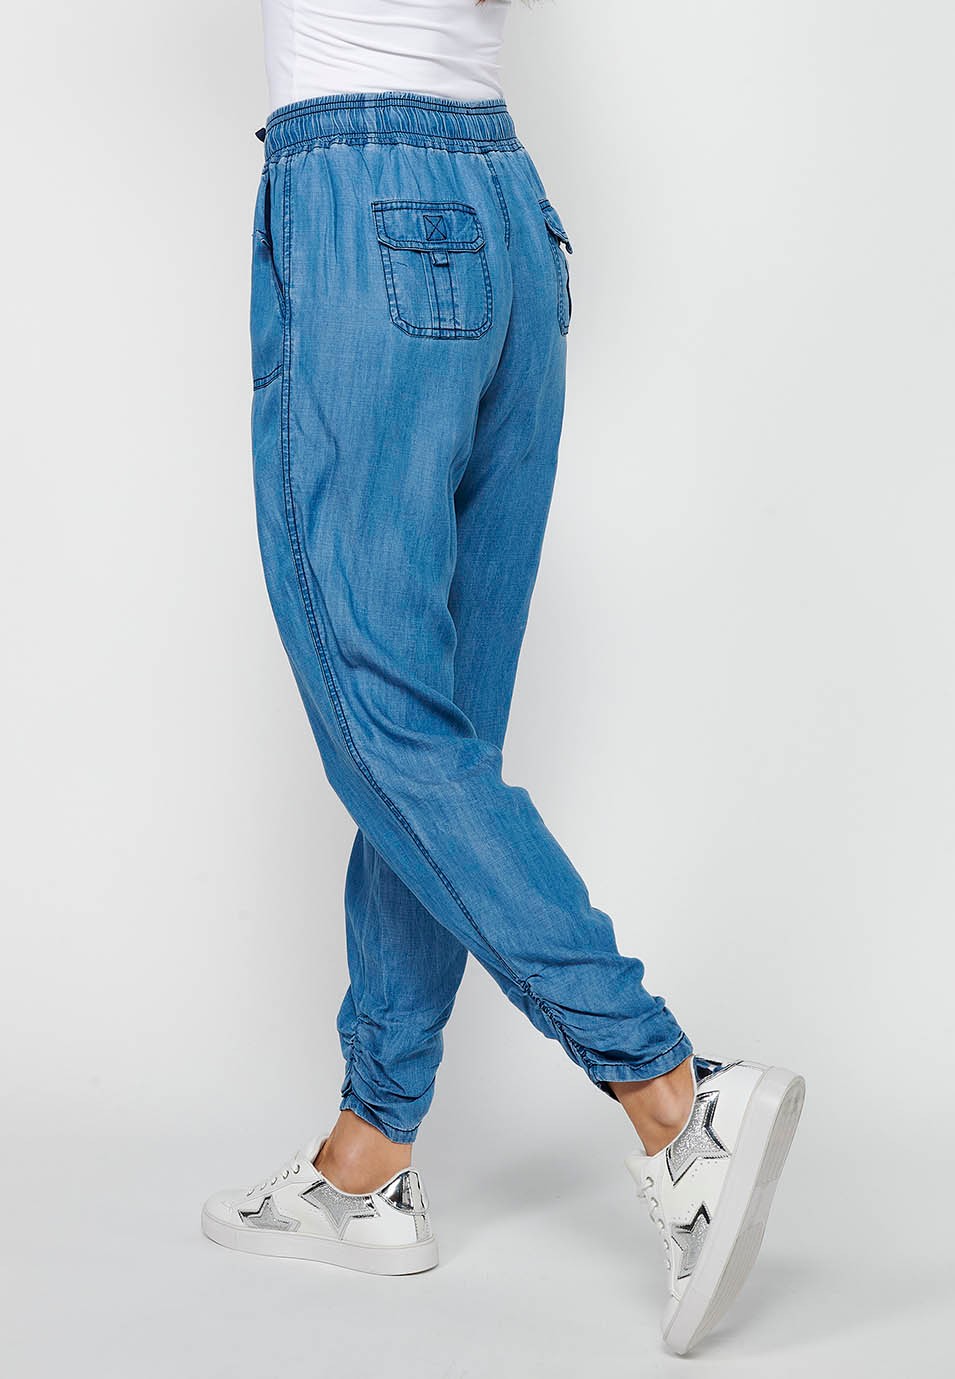 Long jogger pants with curled finish and rubberized waist with four pockets, two at the back with flap in Blue for Women 6